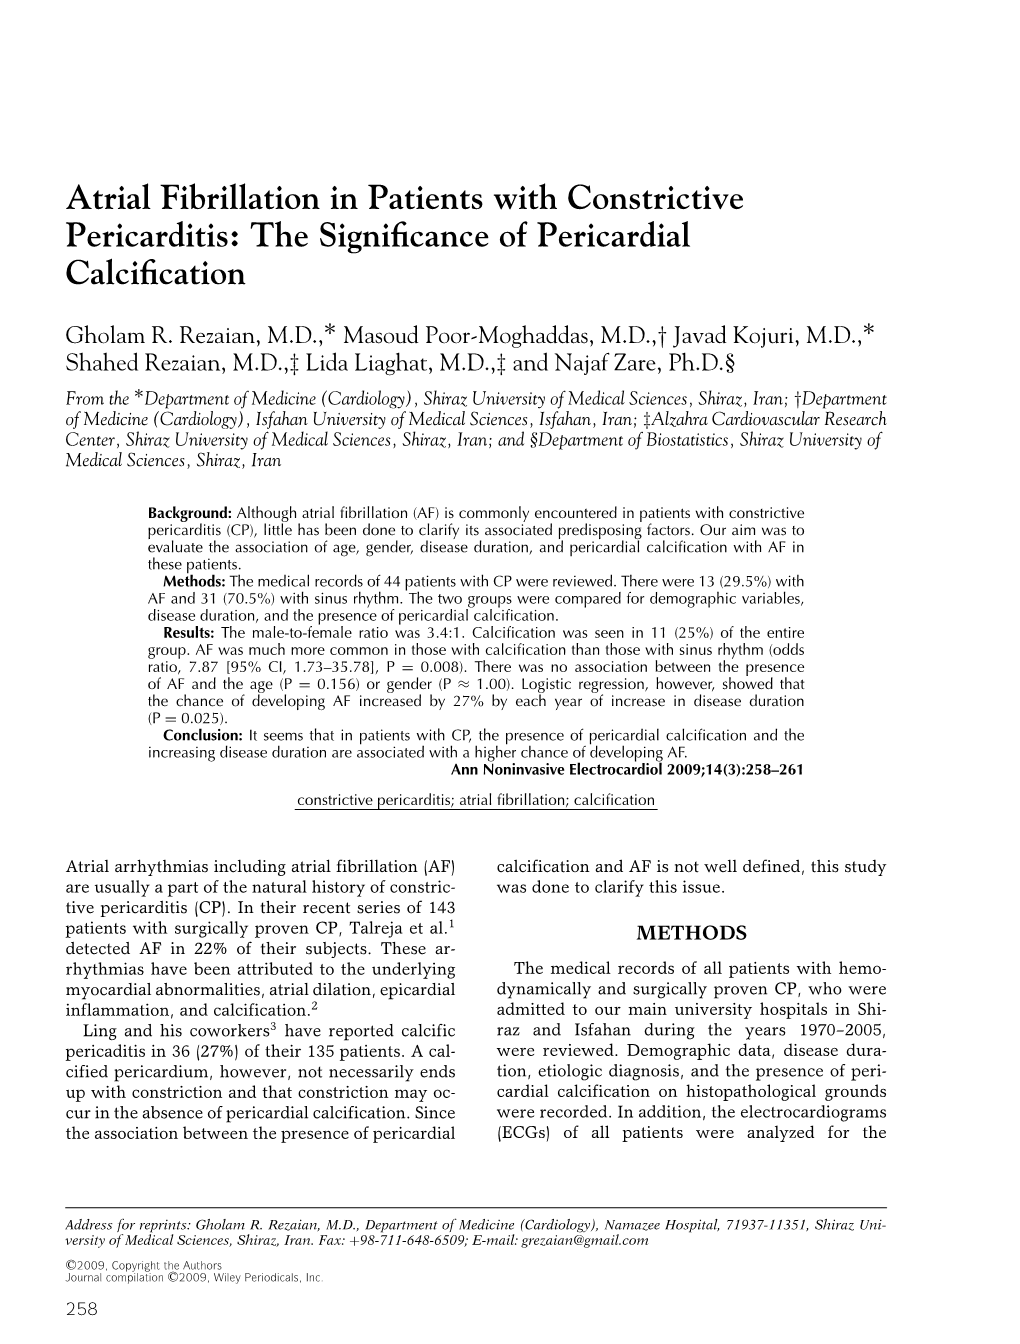 Atrial Fibrillation in Patients with Constrictive Pericarditis: the Signiﬁcance of Pericardial Calciﬁcation ∗ ∗ Gholam R